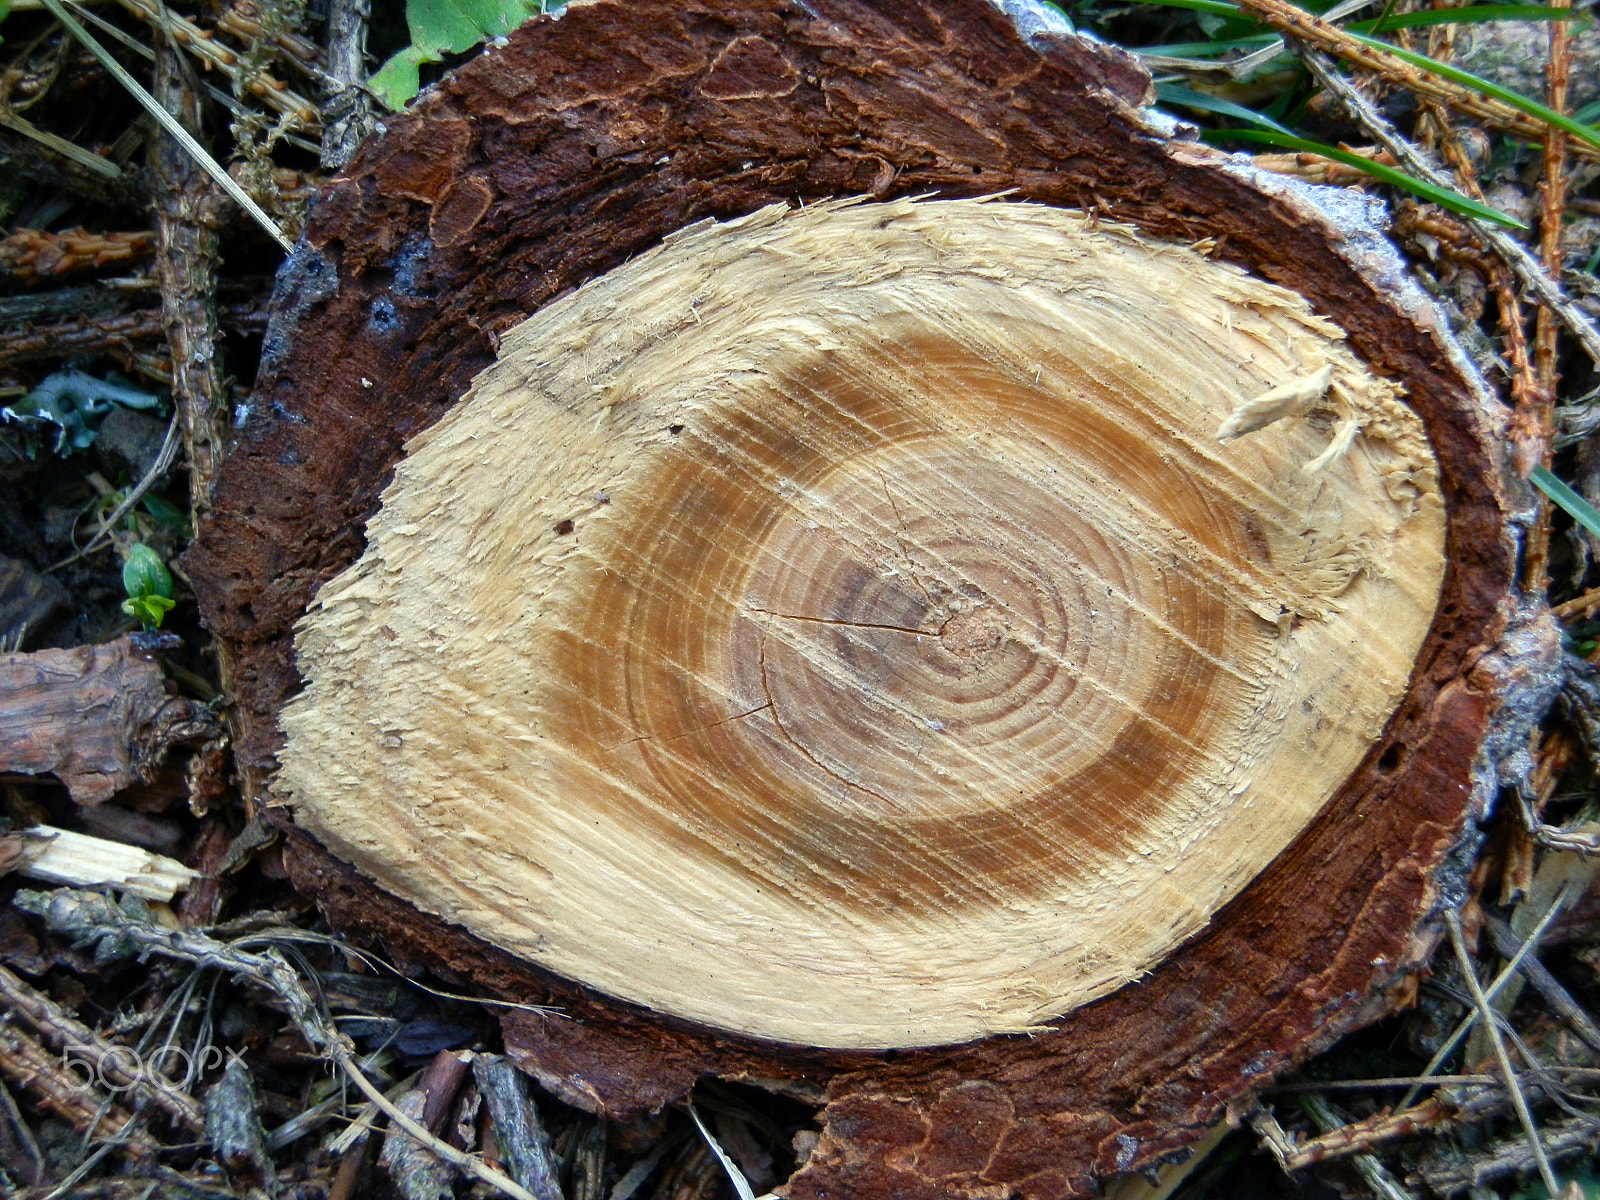 Olympus SZ-10 sample photo. Wooden eye from pine wood photography